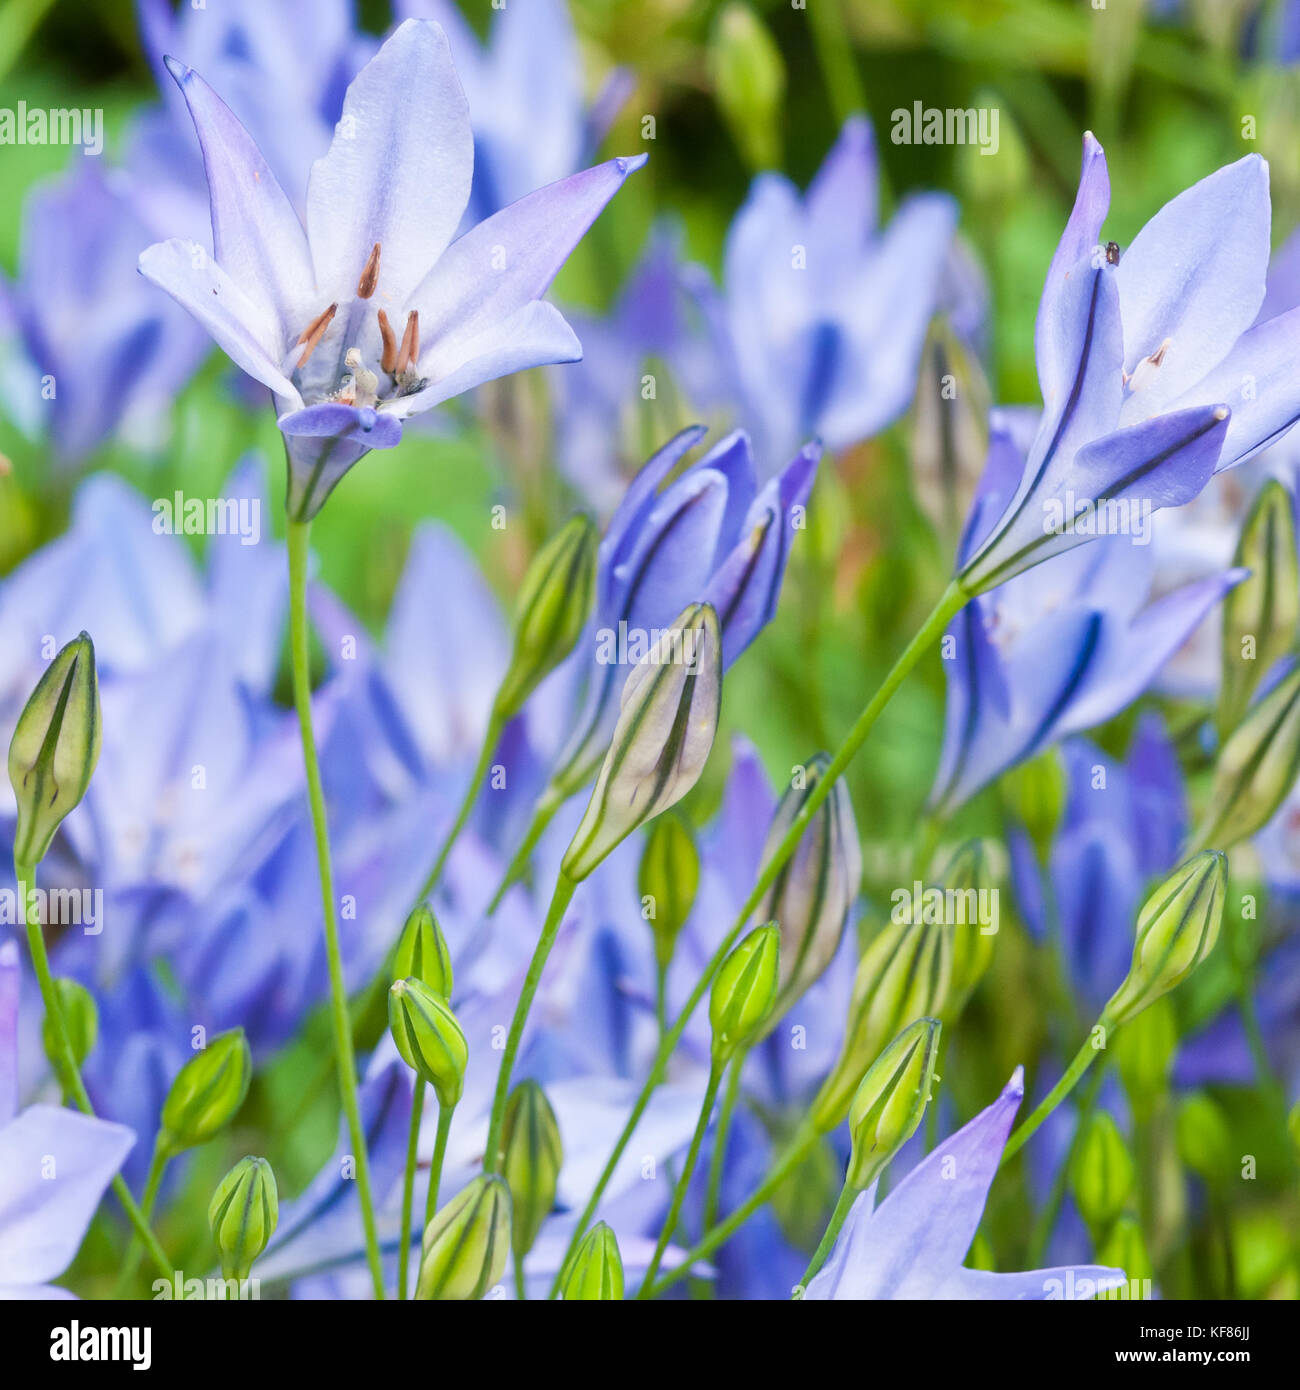 A collection of blue grass nut blooms. Stock Photo